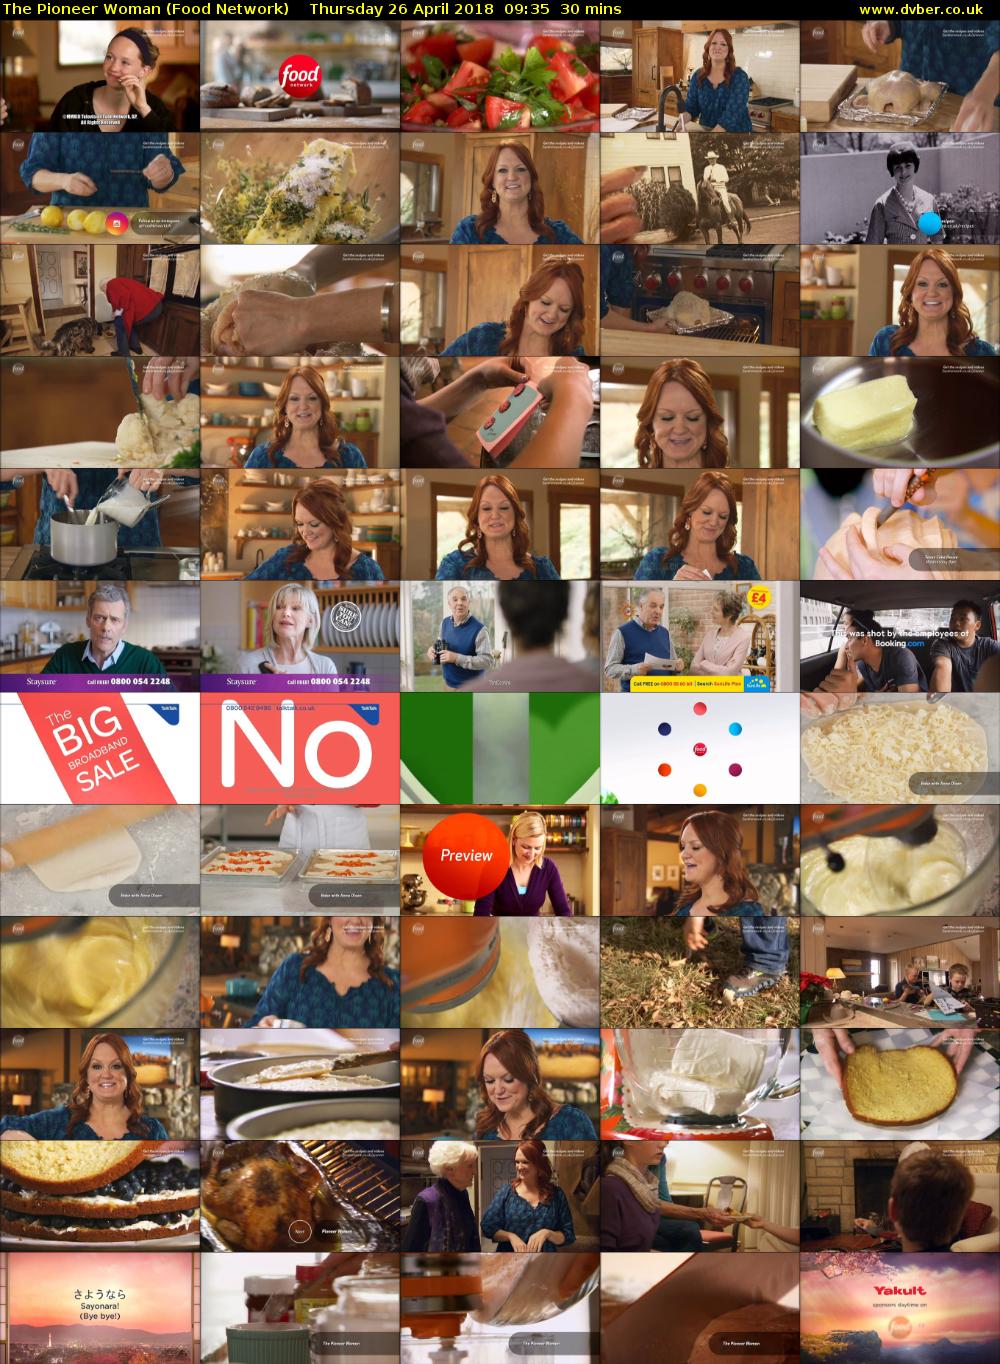 The Pioneer Woman (Food Network) Thursday 26 April 2018 09:35 - 10:05